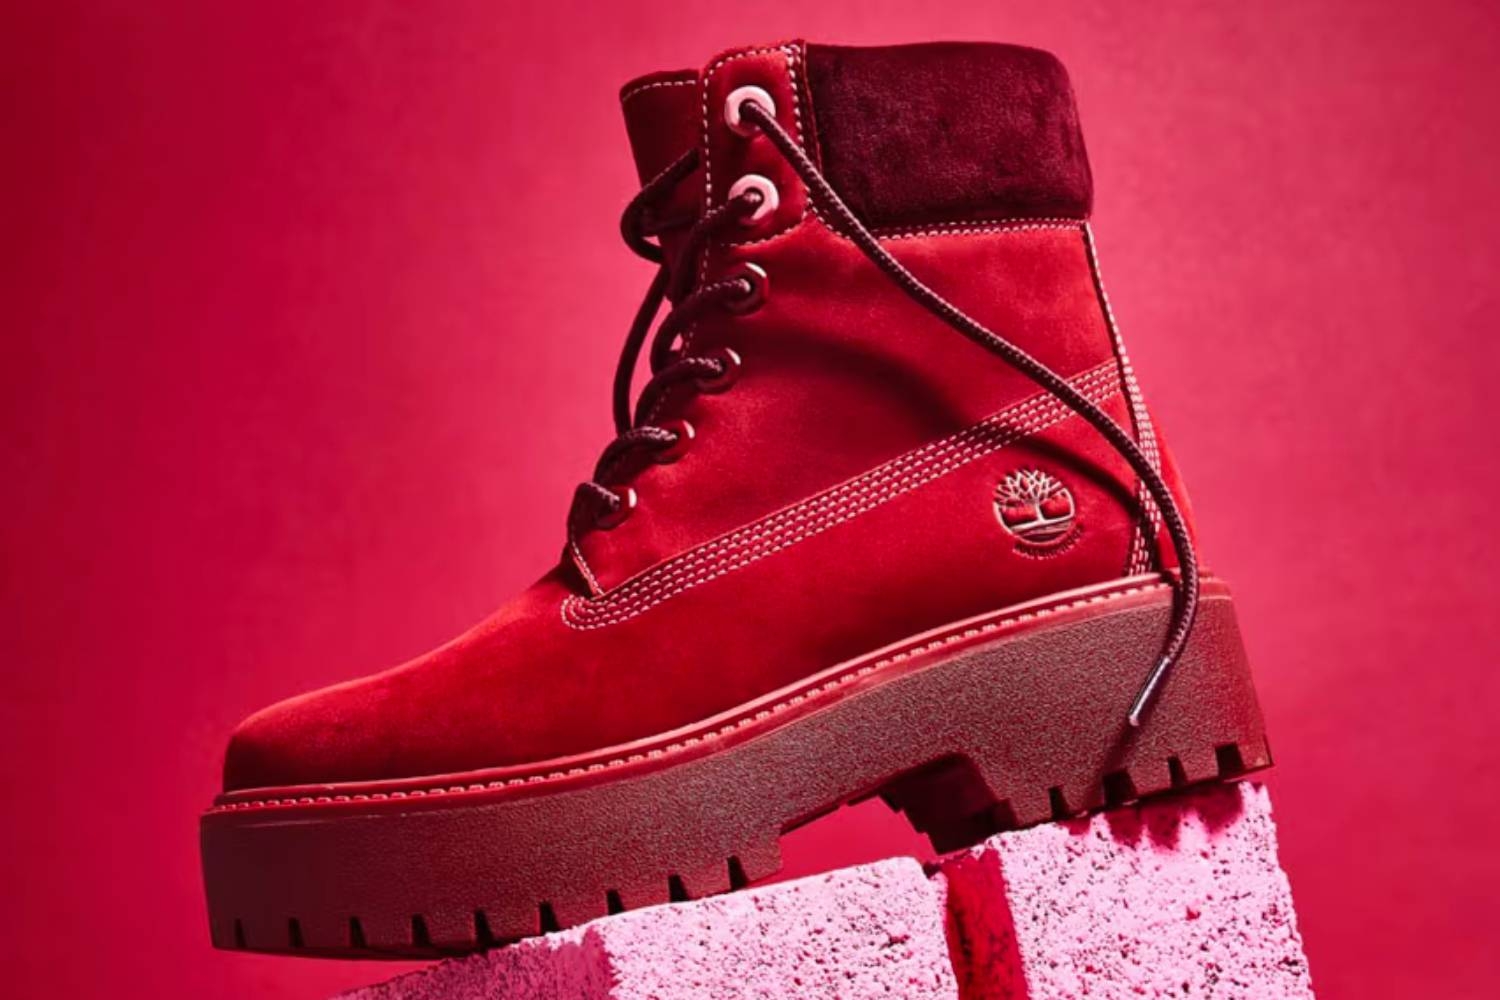 Timberland releases special boots for Valentine's Day